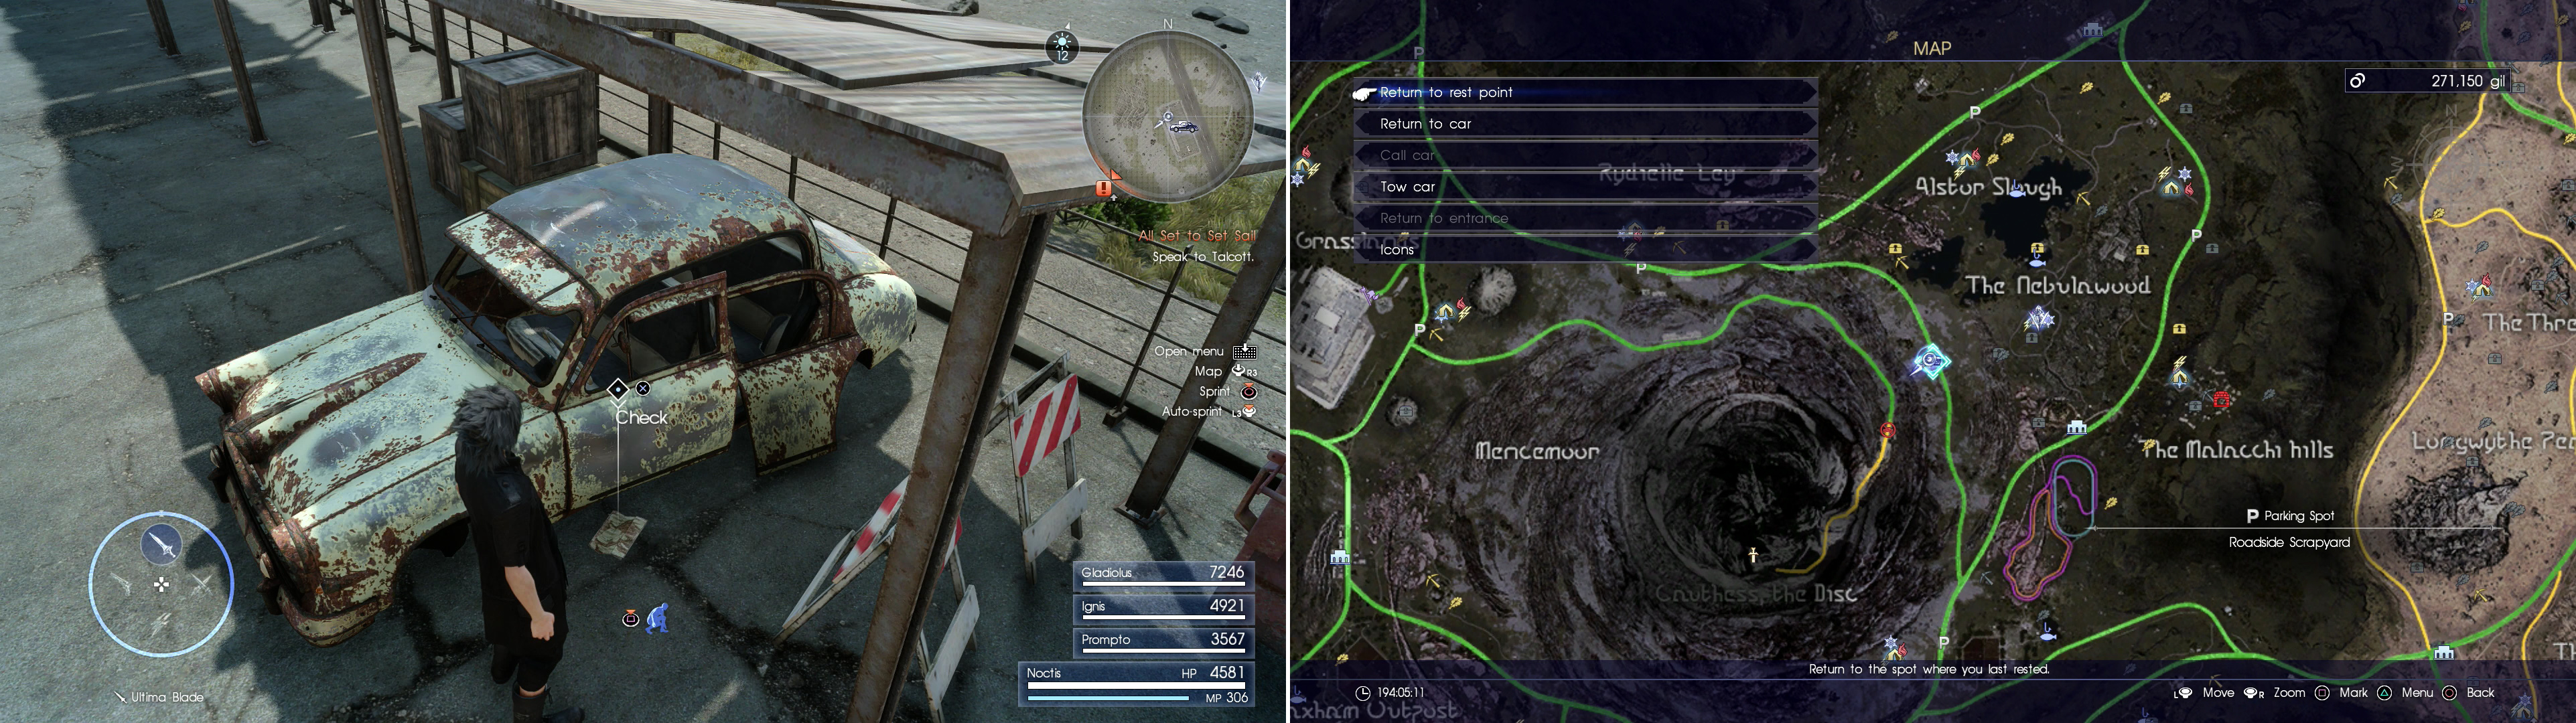 You’ll find Mystery Map VI near a broke-down car (left) at the Roadside Scrapyard Parking Spot (right).